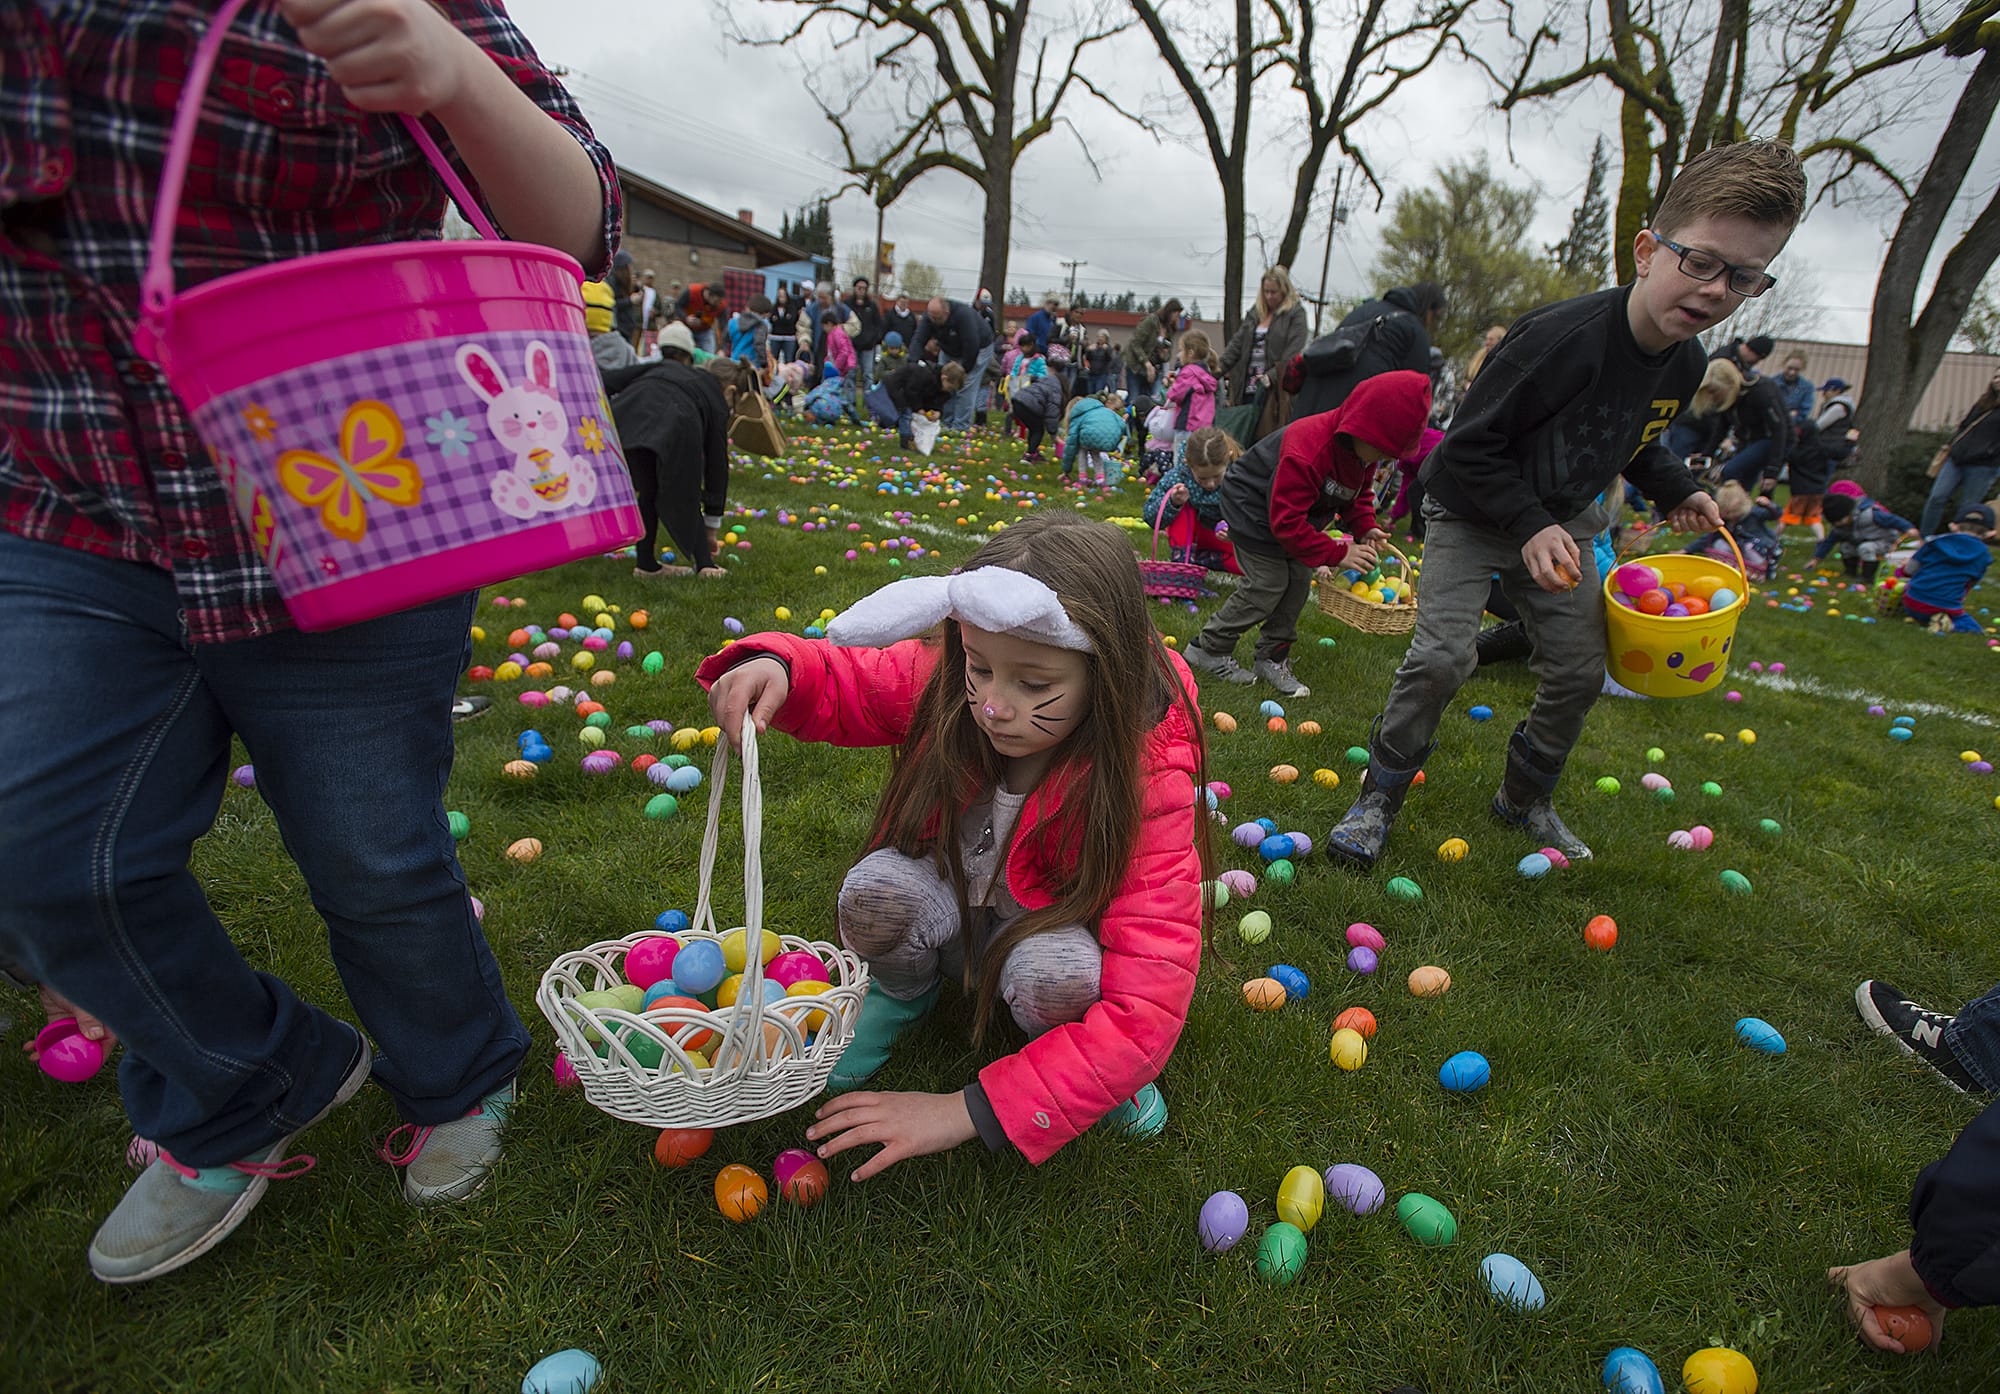 Hadley Hamilton, 6, of Ridgefield, center with bunny ears, joins the hunt for Easter eggs during the egg hunt at Overlook Park in Ridgefield on Saturday morning.